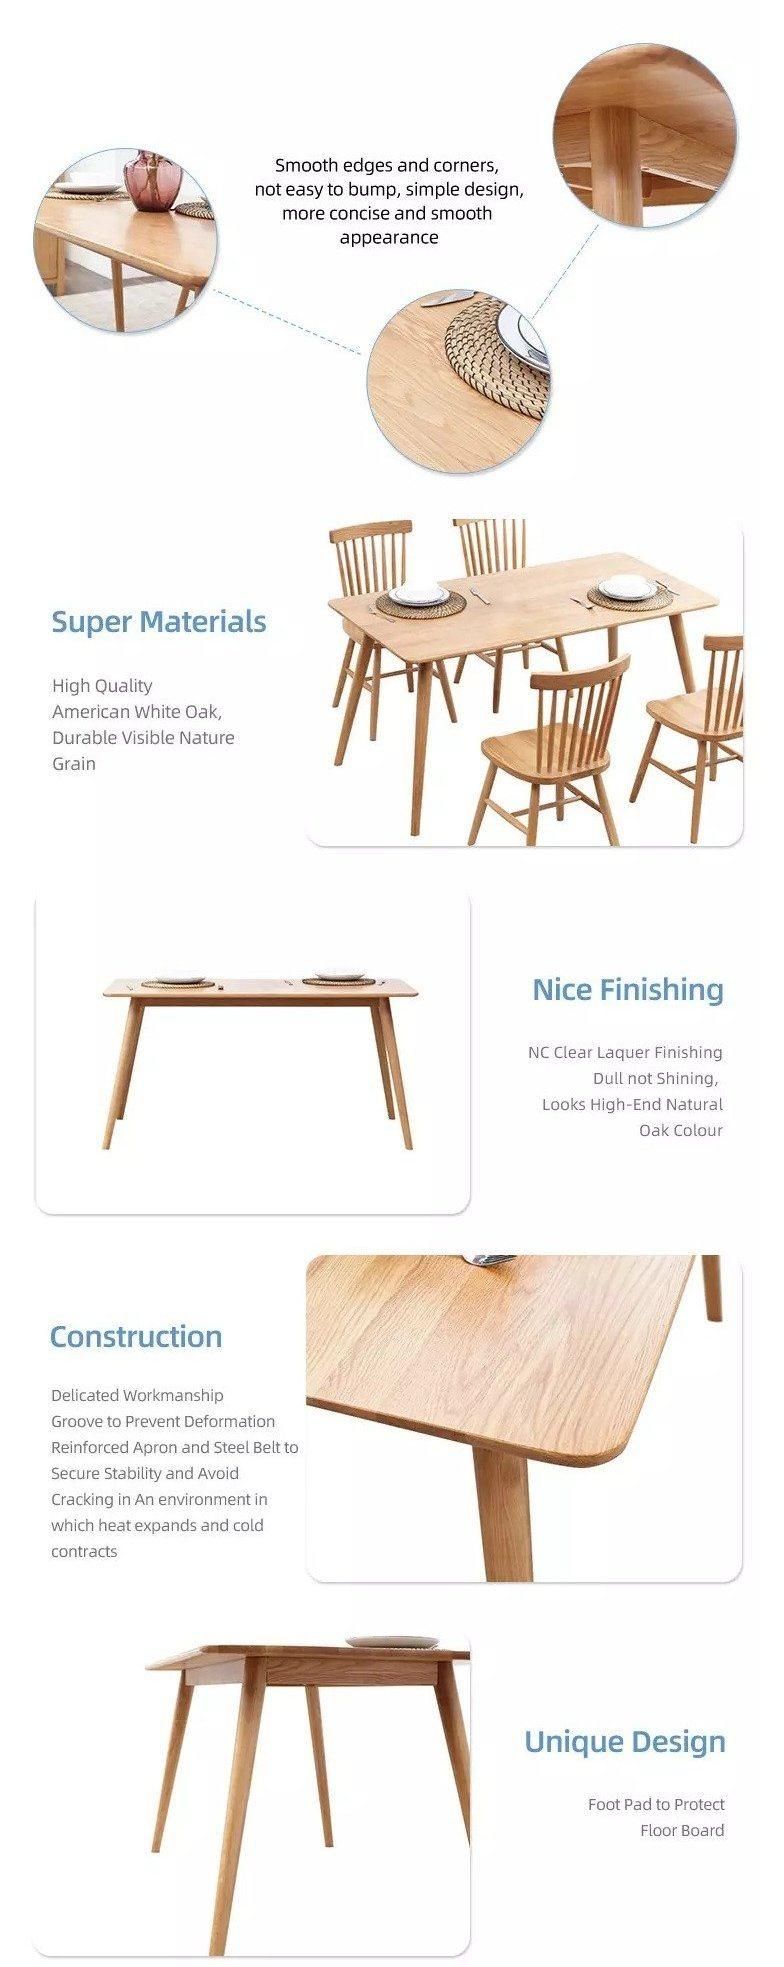 Furniture Modern Furniture Chair Home Furniture Wooden Furniture High Quality Simplicity Style Elegant Look Home Furniture Dining Table Set for 6 Wood Legs